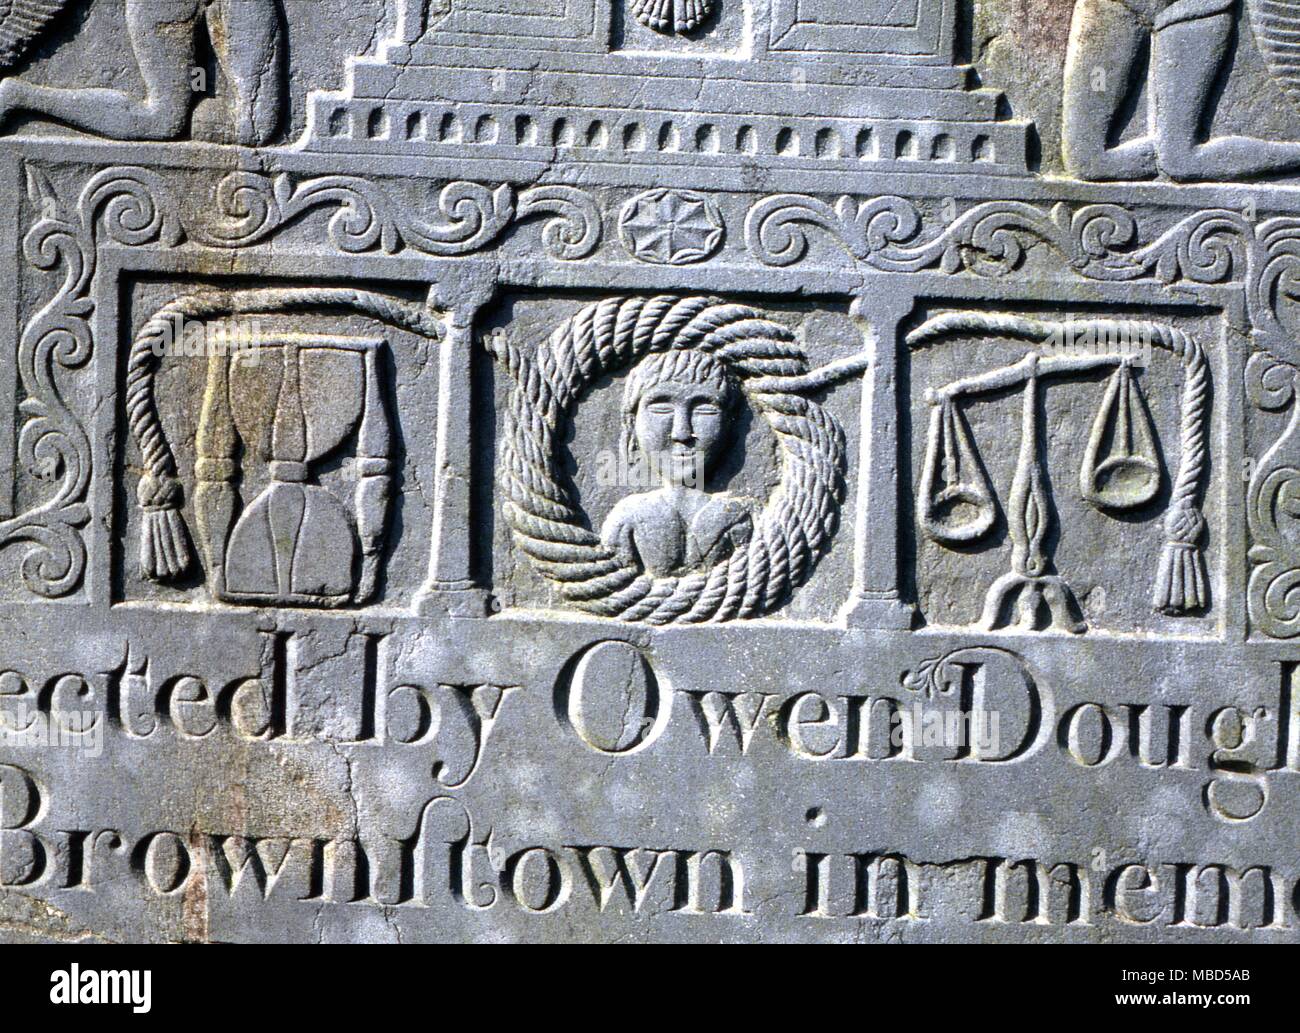 Symbols - Hour Glass. Headstone of the early 19th century, with bas relief of Crucifixion and various symbols of death and resurrection, including hour glass and scales. Ireland. Stock Photo